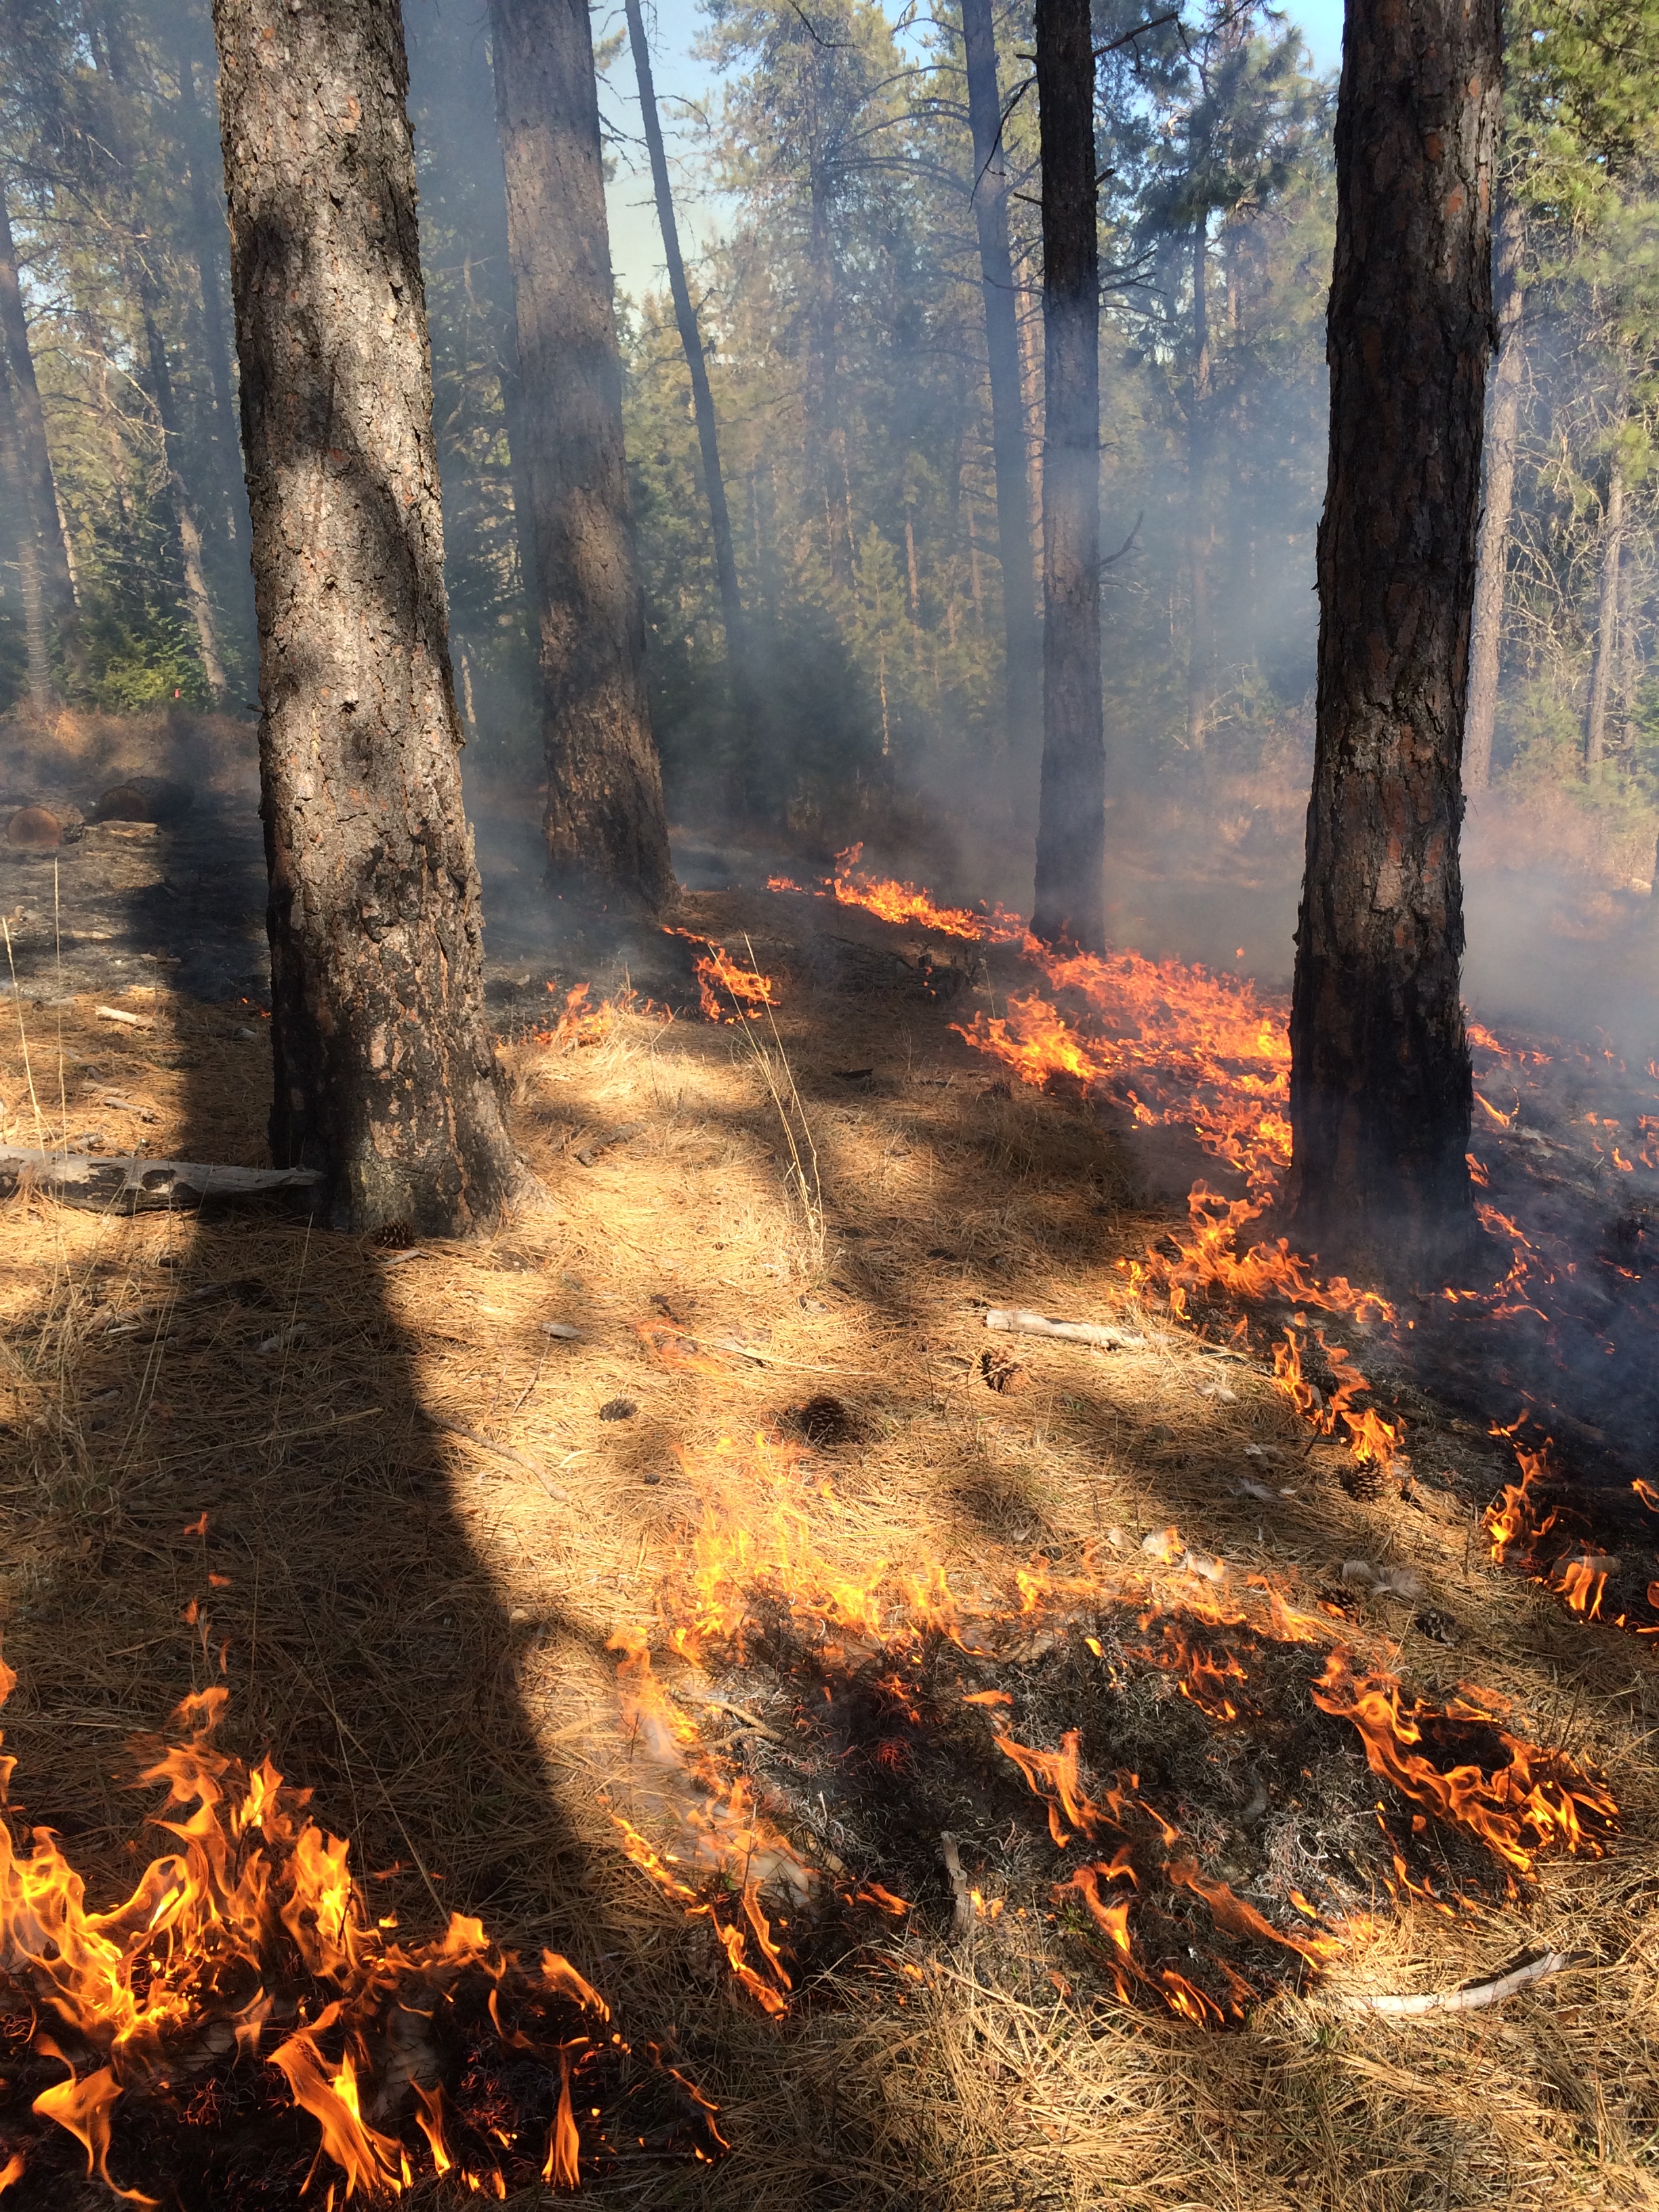 Example of a Controlled Burn